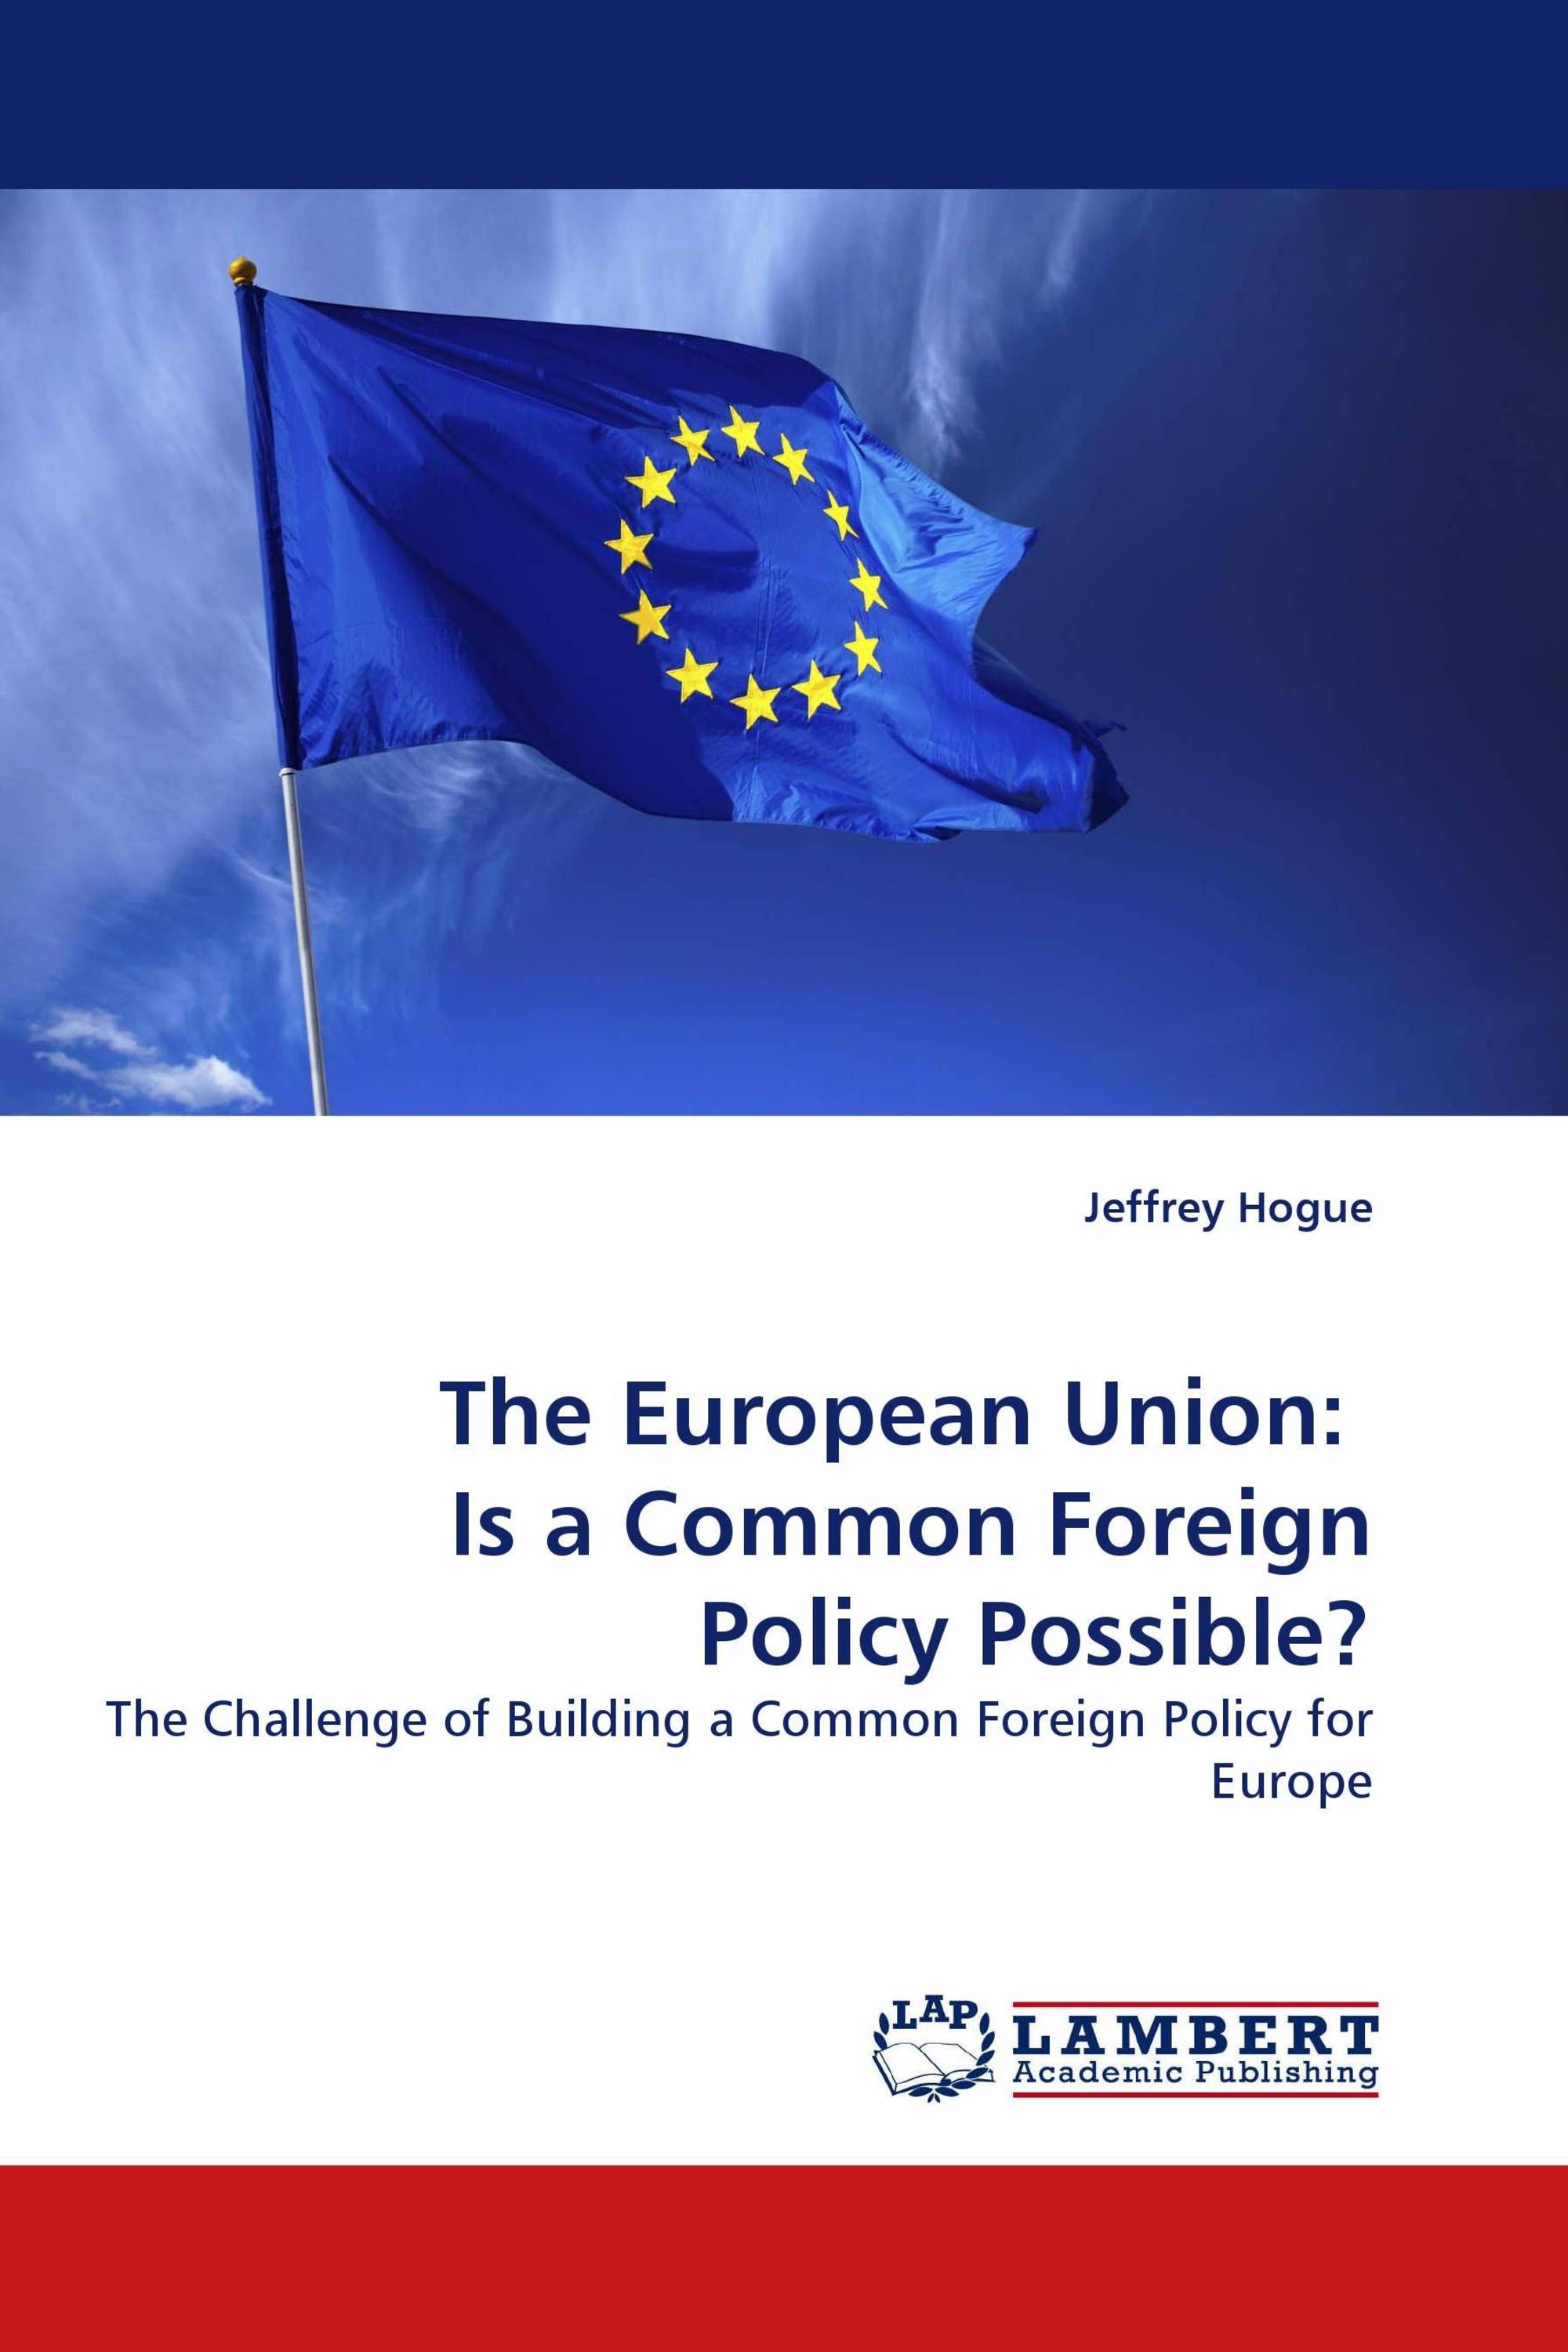 The European Union:   Is a Common Foreign Policy Possible?